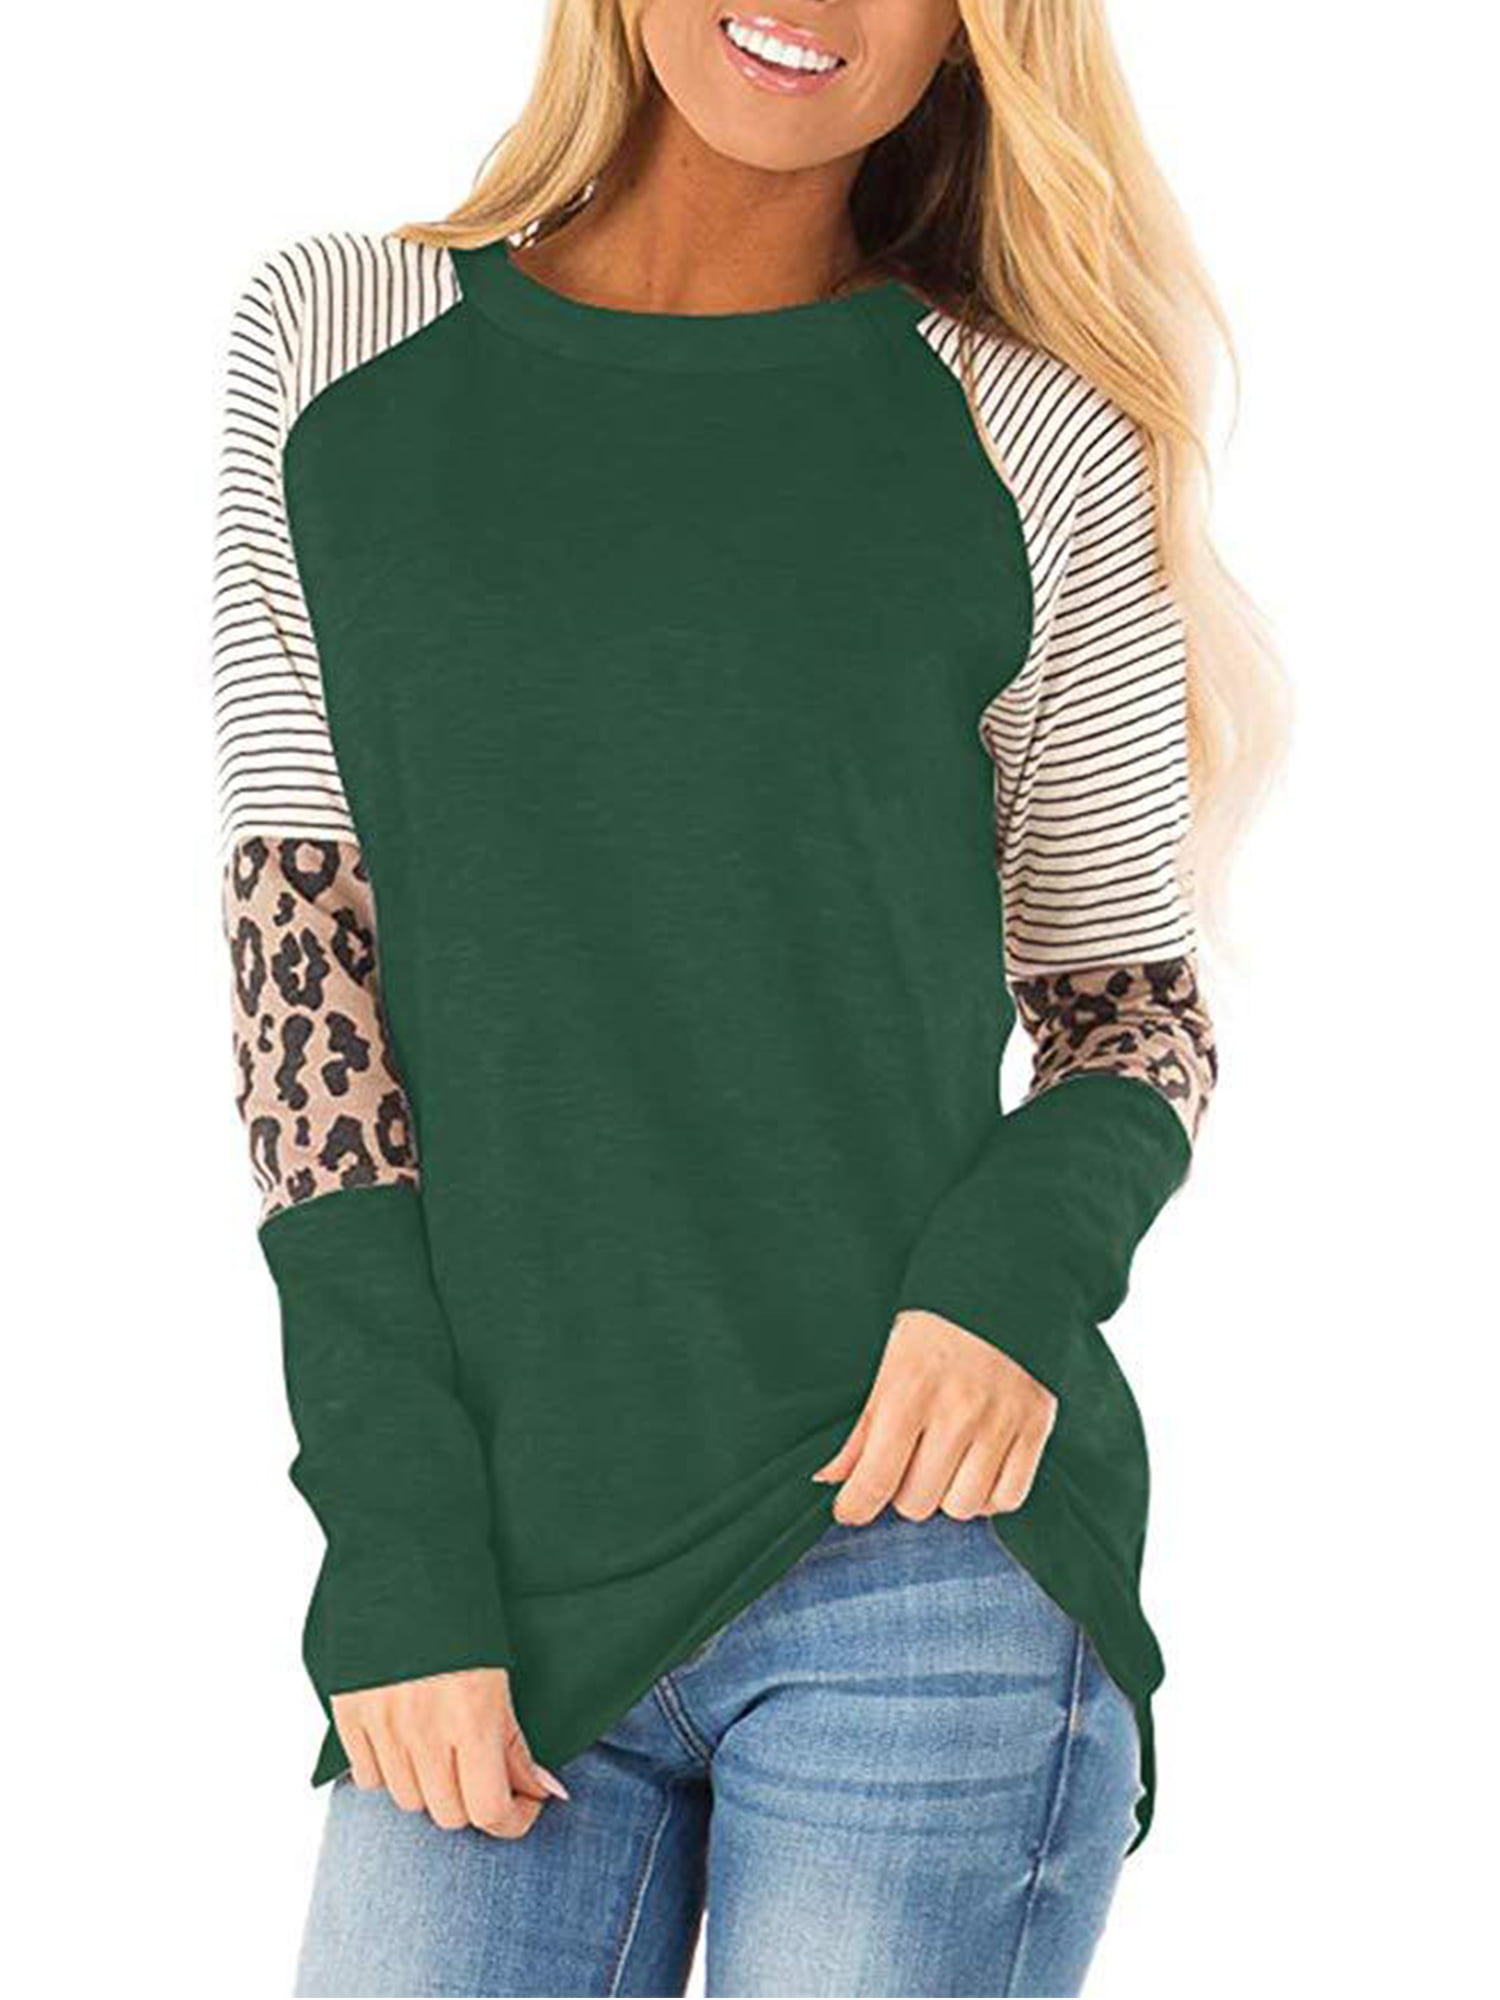 Women Casual T Shirts Leopard Print Stripe Splicing Long Sleeve Pullover Tops Fashion Colorblock Tunic Blouses 